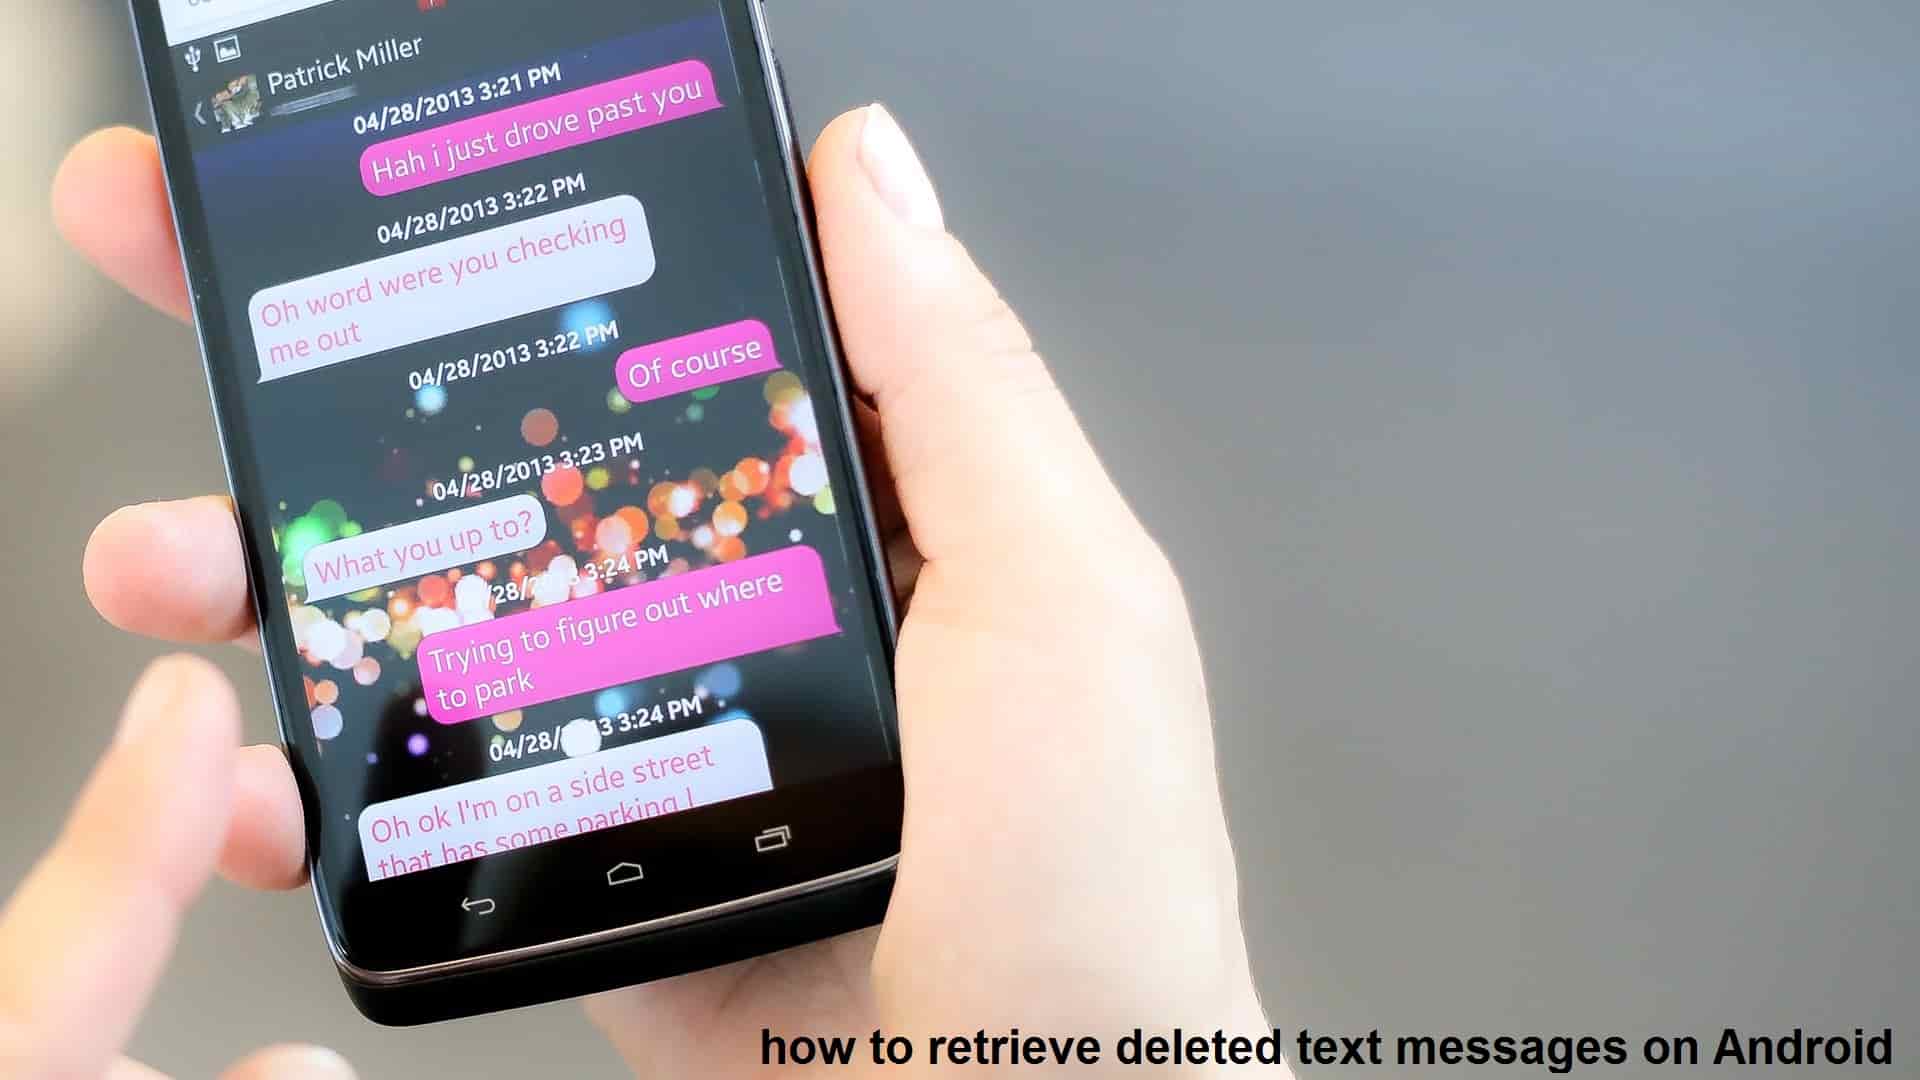 All you need to know how to retrieve deleted text messages from android phone or iPhone